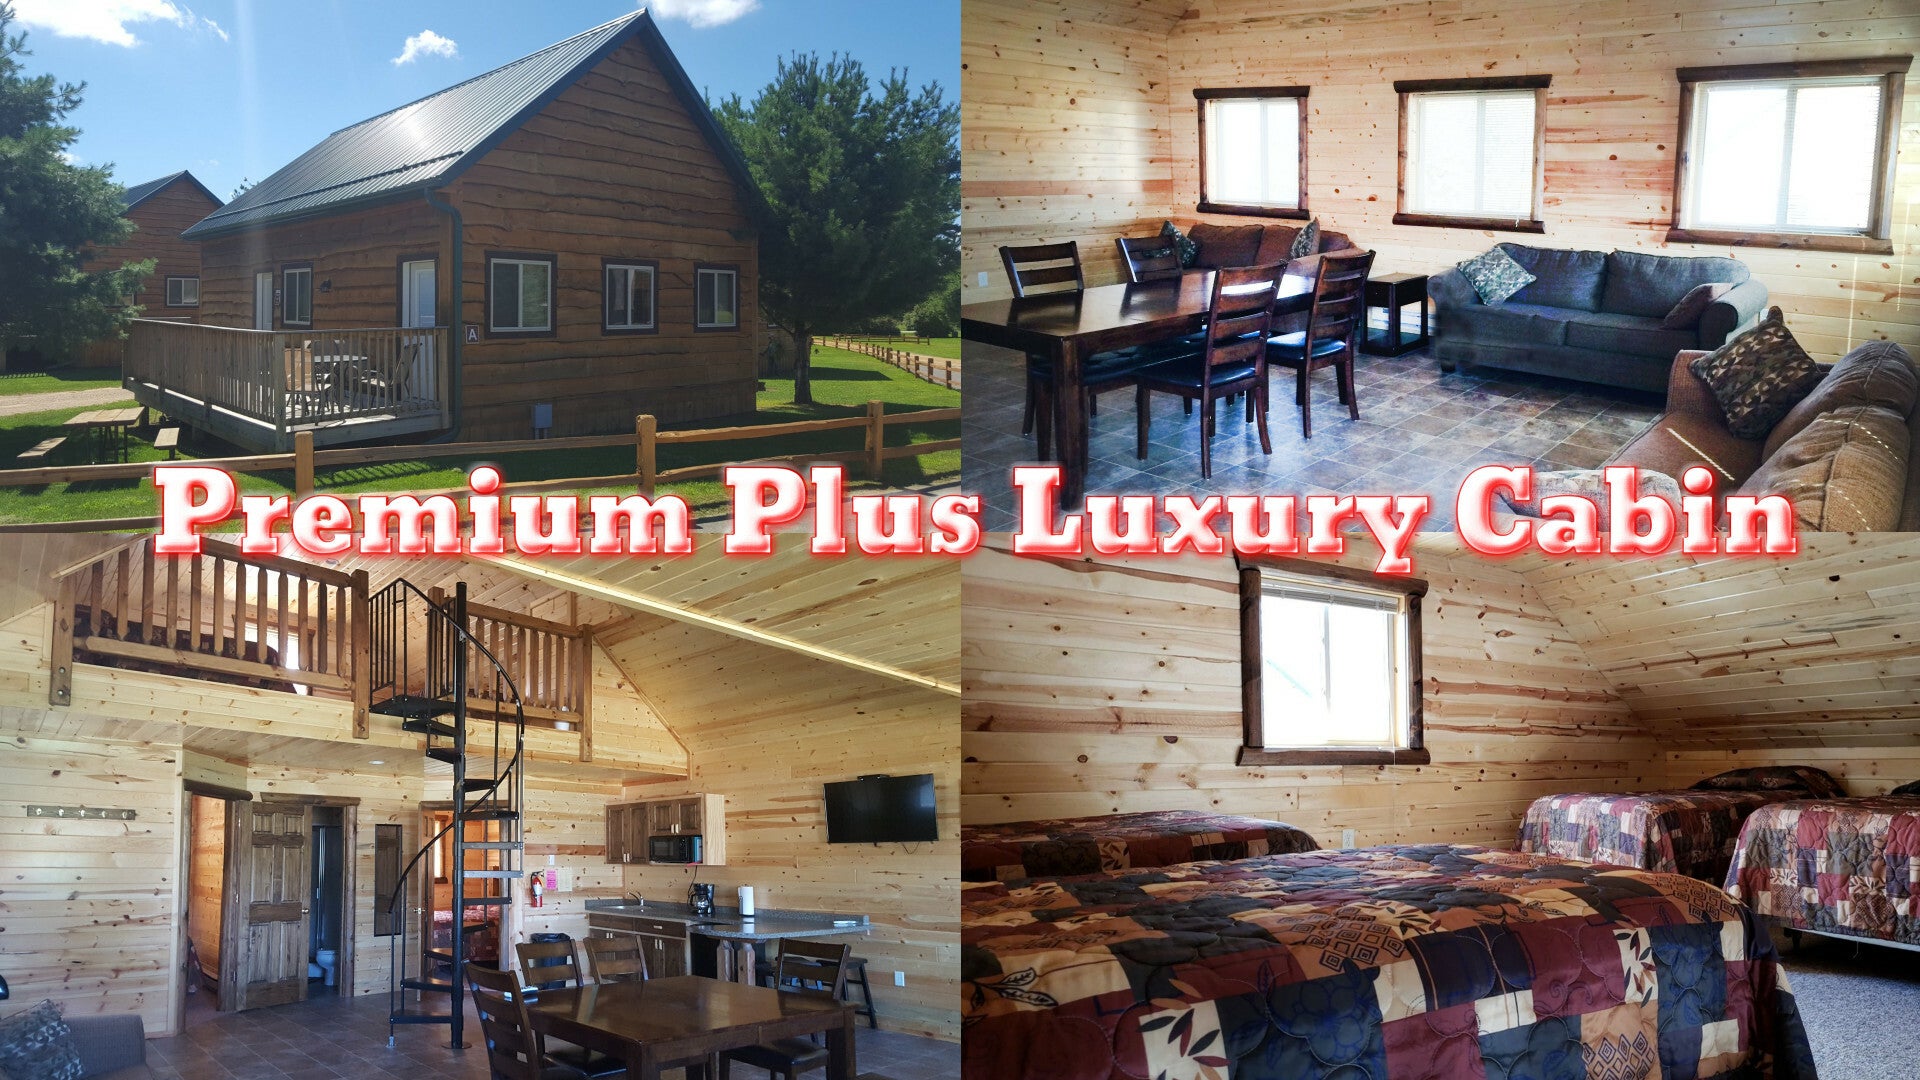 Premium Plus Luxury Cabin- Sleeps 14 people, 2 bedrooms-1 Queen bed in each, ladder loft with 4 twin beds, 3 sofa sleepers, flat screen TV, full bathroom (bring towels) attached deck with table and a few chairs, kitchenette with microwave, mini refrigerator, charcoal grill, picnic table and fire-ring.